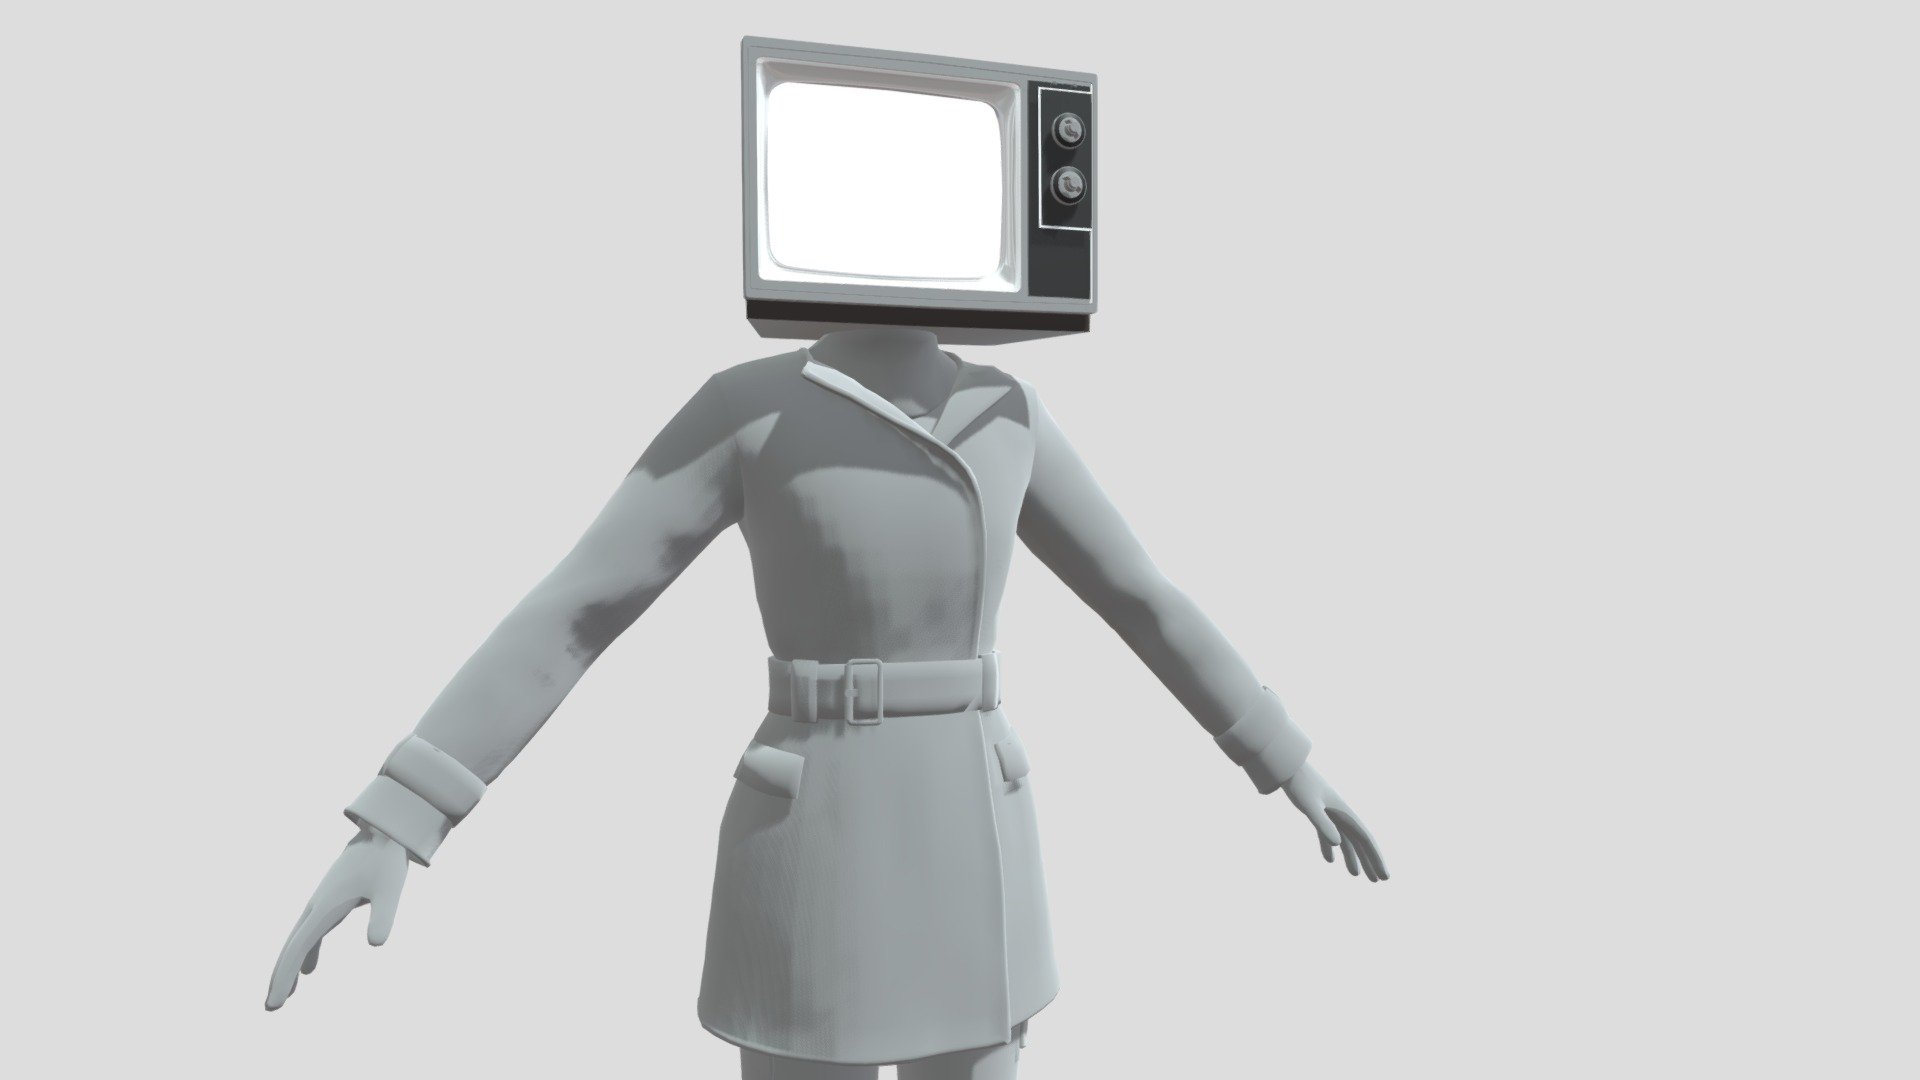 Tv WOMAN || Skibidi toilet | blender 3d models  | full rigged

preview 3d model :- https://www.deviantart.com/fintuboi93/art/Tv-WOMAN-Skibidi-toilet-full-rigged-972552097

” Get your hands on this amazing 3D model for FREE by joining my Patreon now! For just 1!!!😉 “

Patreon link :-www.patreon.com/fintuboi - 👍

😍 you’ll not only get this model but also access to all my other models. Don’t miss out on this incredible deal! 😍

skibidi toilet = Tv WOMAN - Tv WOMAN || Skibidi toilet || full rigged - 3D model by fintuboi 3d model